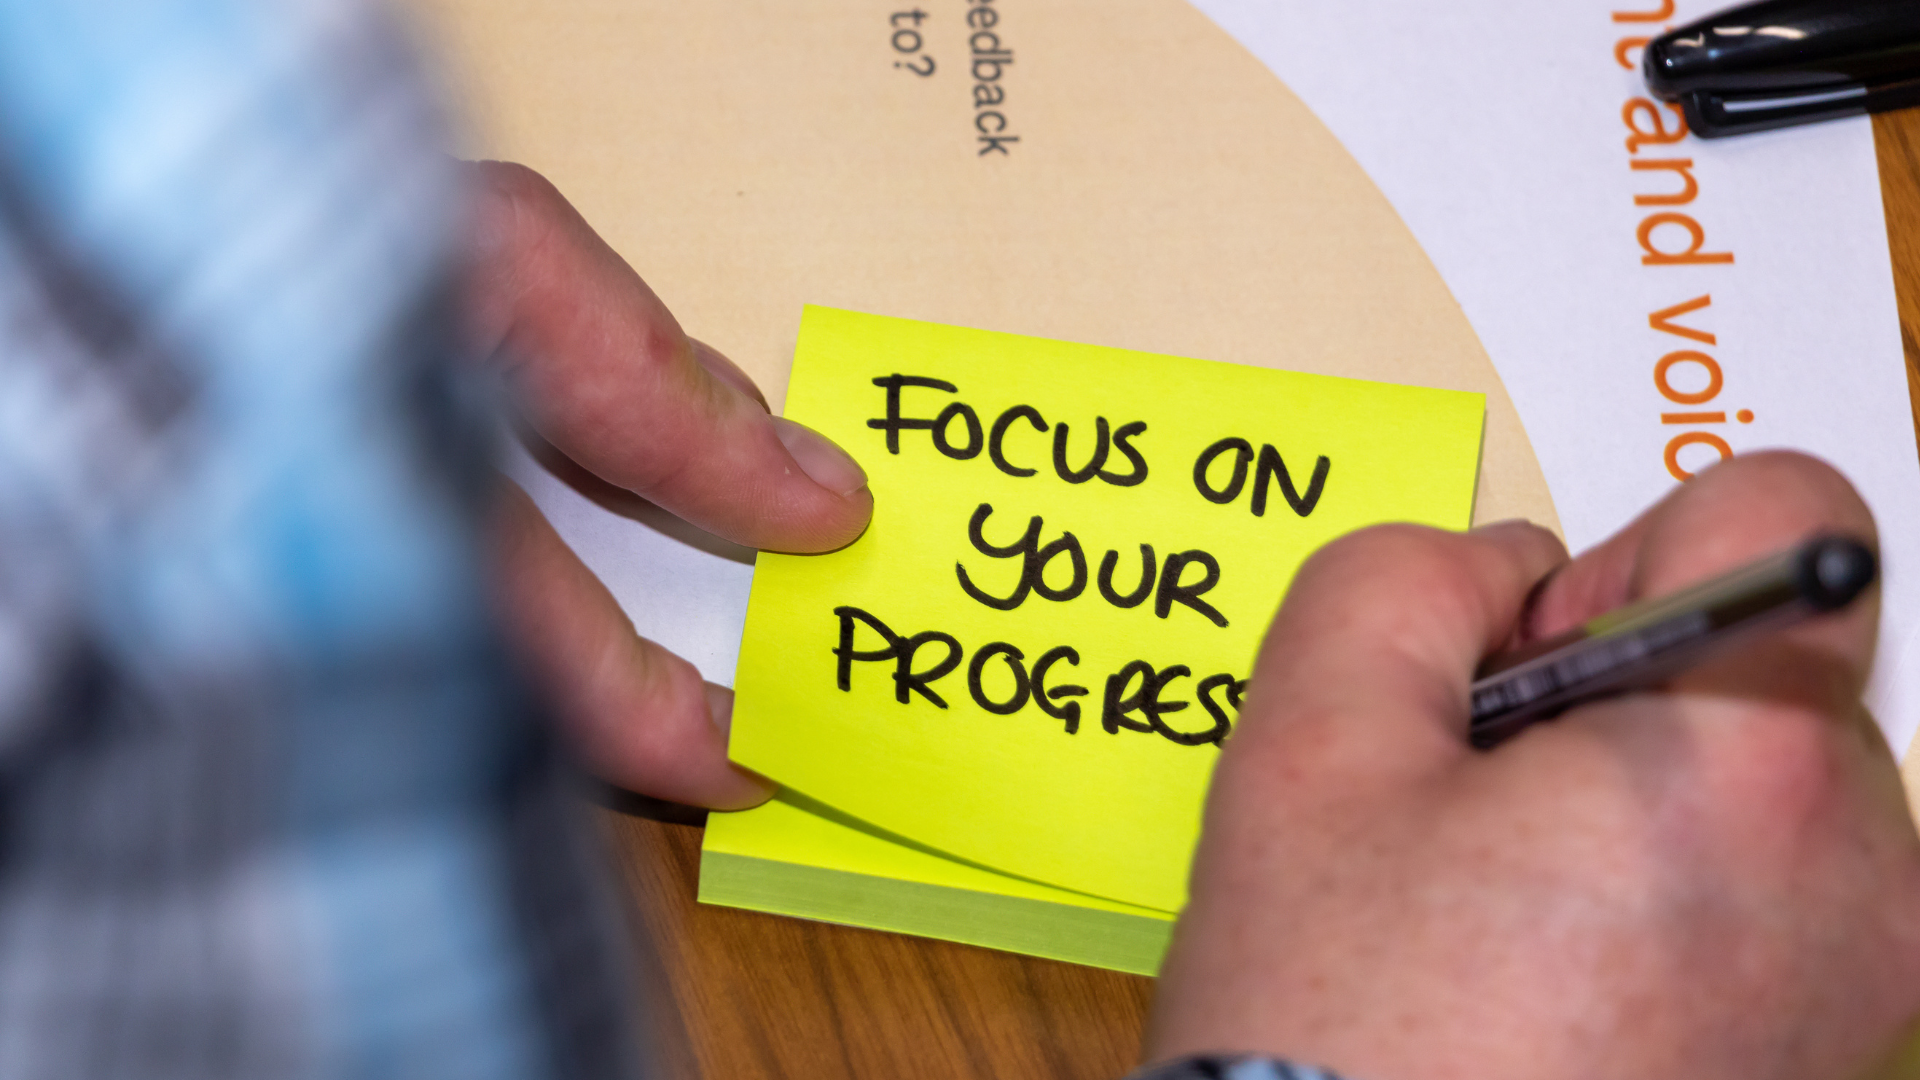 Focus on your progress written on a sticky note